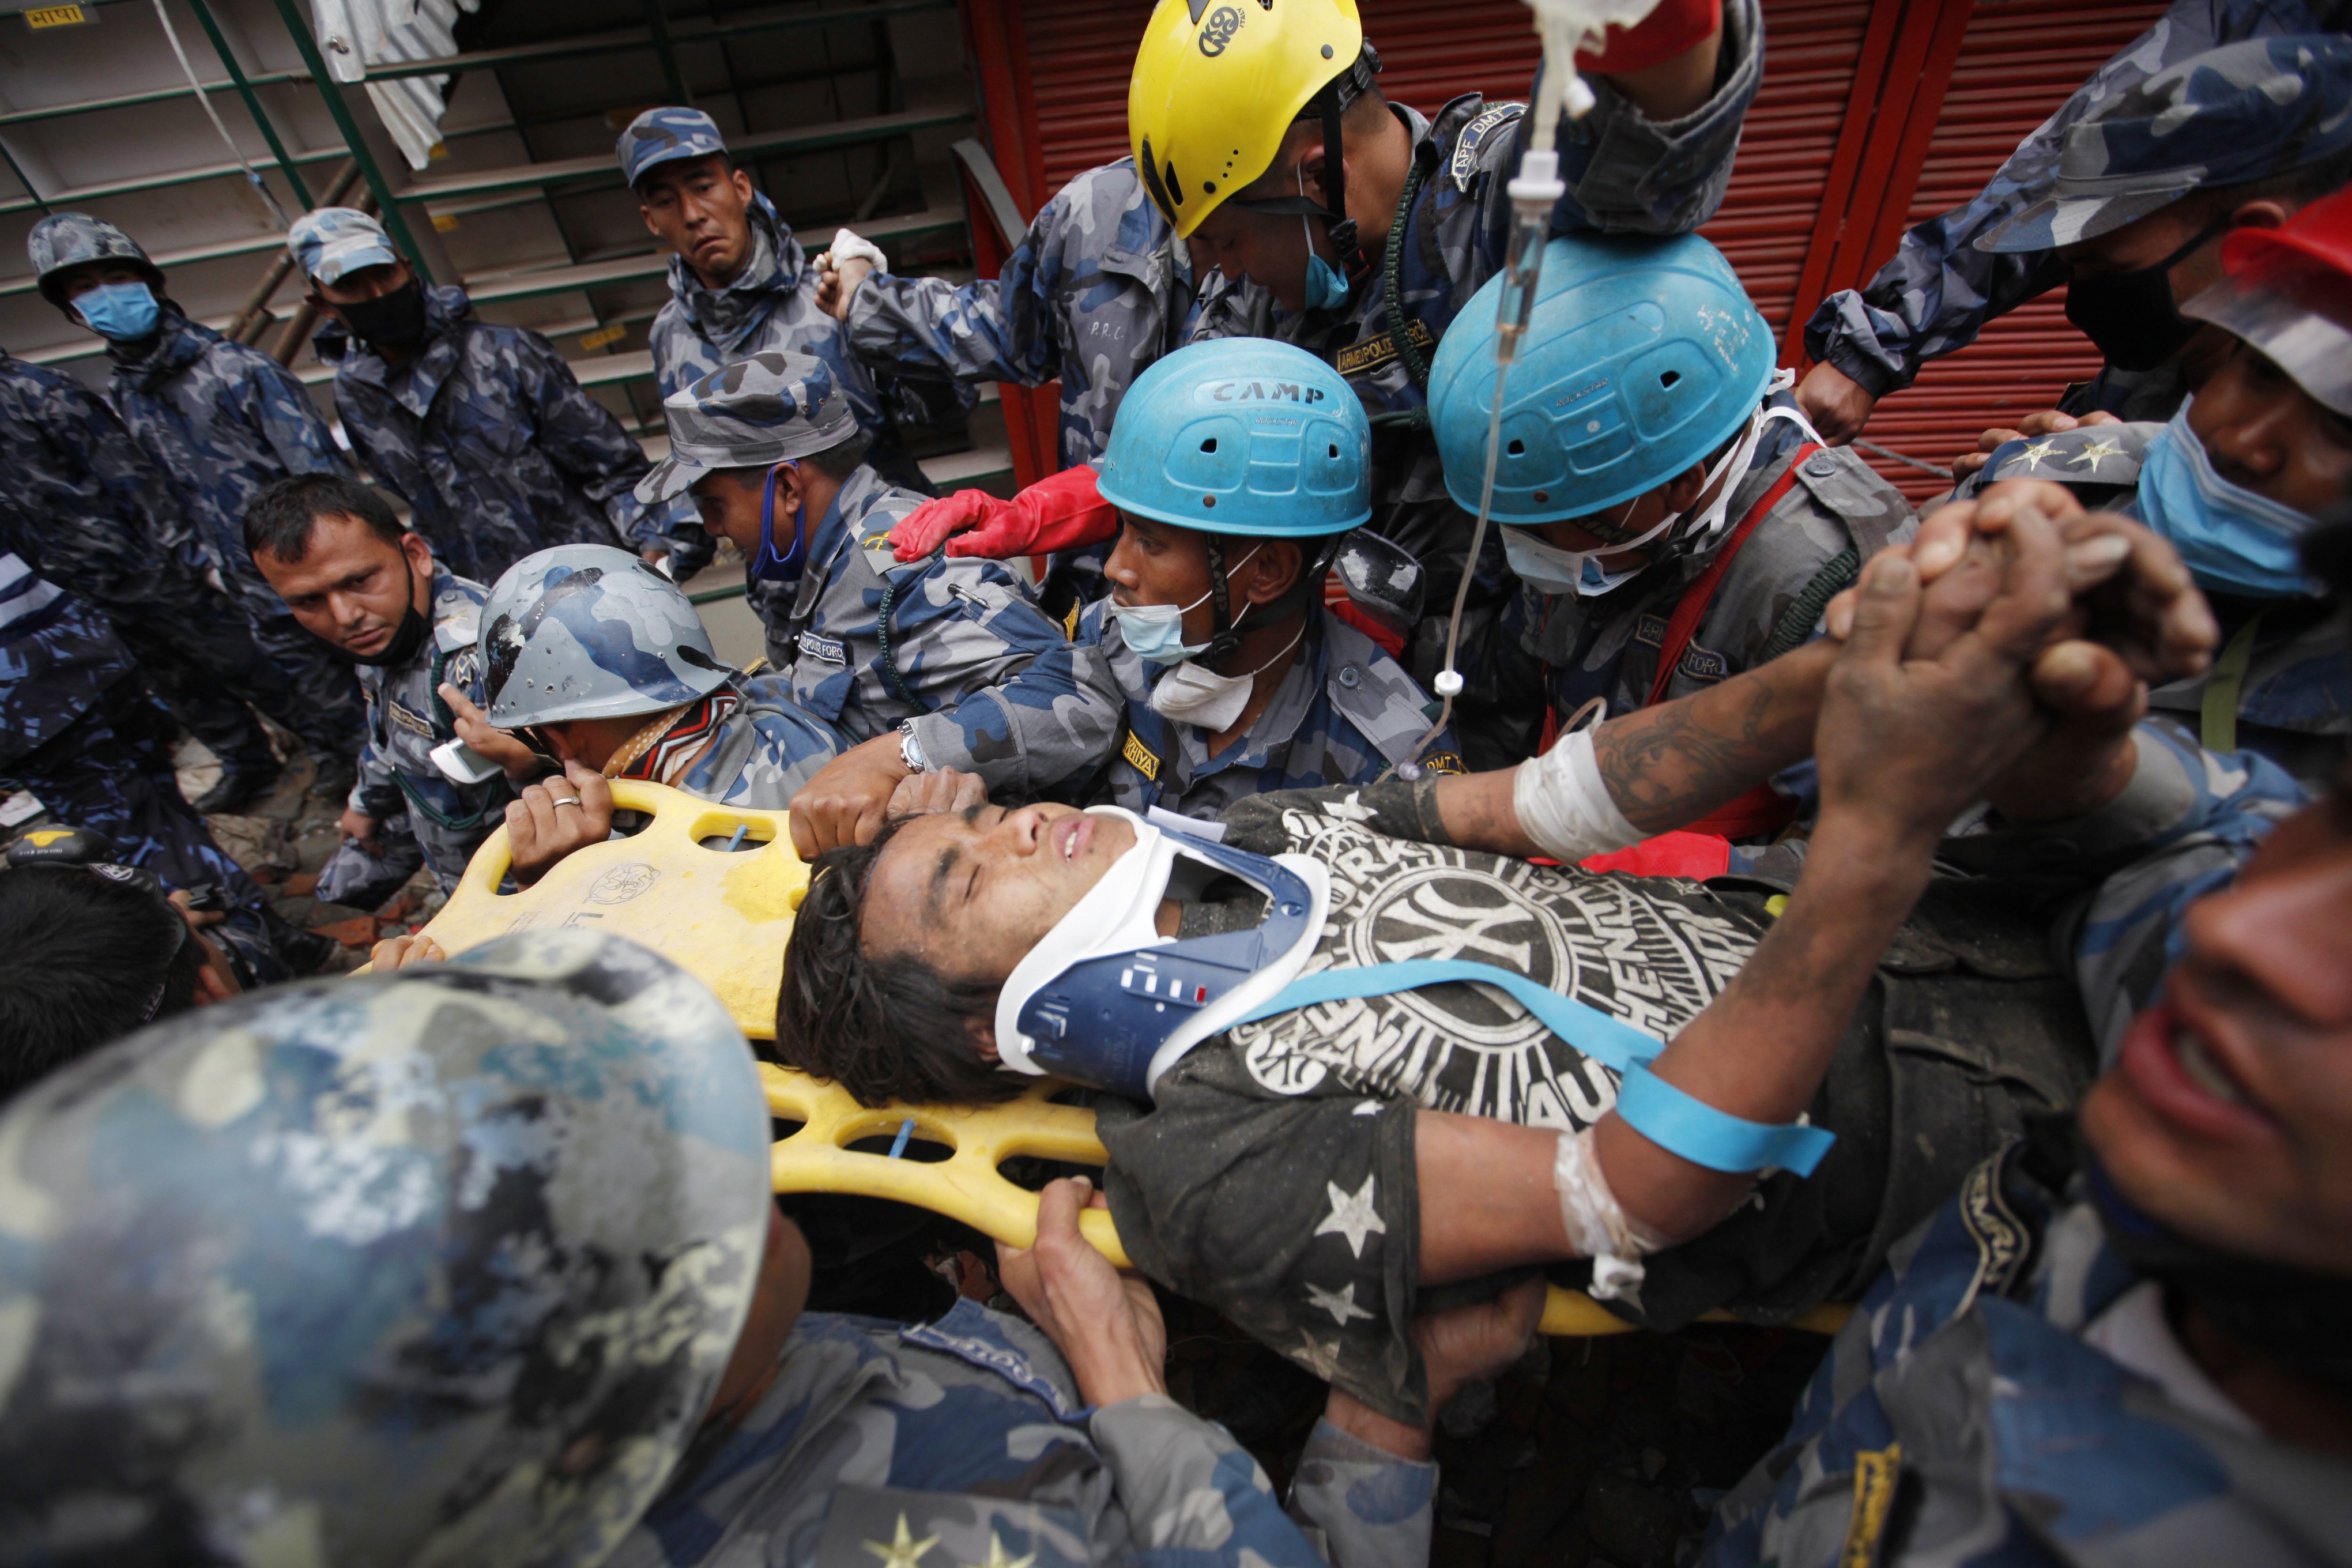 Pemba Tamang is carried on a stretcher after being rescued by Nepalese policemen and U.S. rescue workers from a building that collapsed five days ago in Kathmandu, Nepal on April 30, 2015. (Niranjan Shrestha—AP)